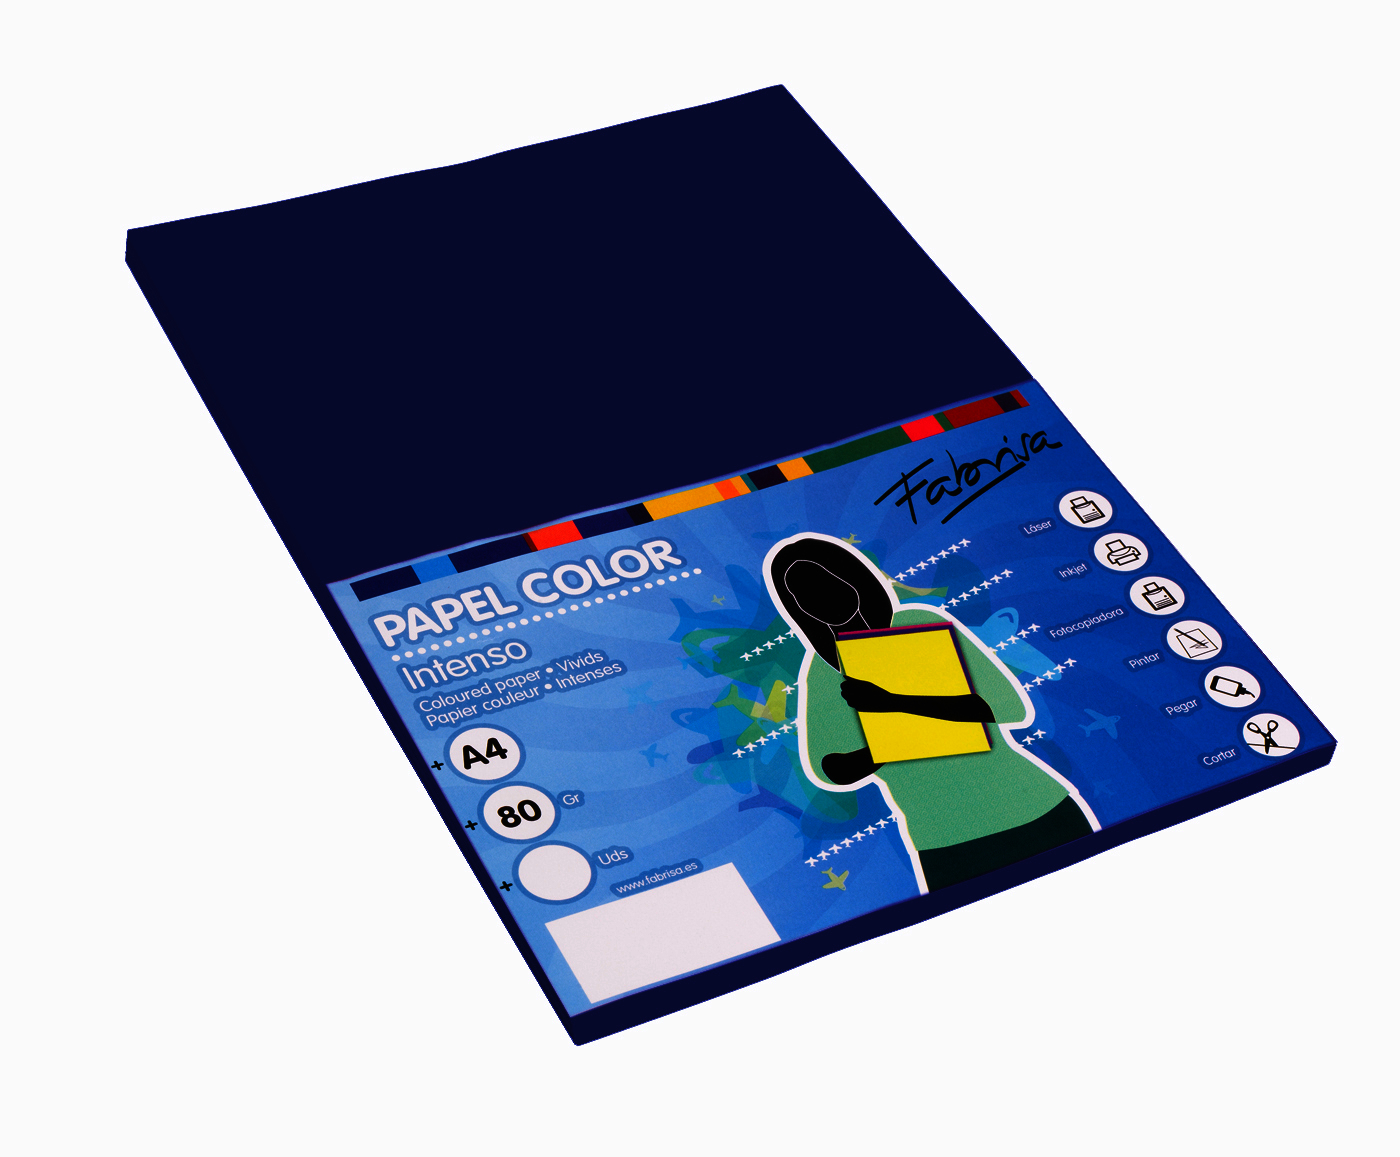 Papel color DIN A4 80 grs azul oscuro paquete 100 hojas. Ref 17110